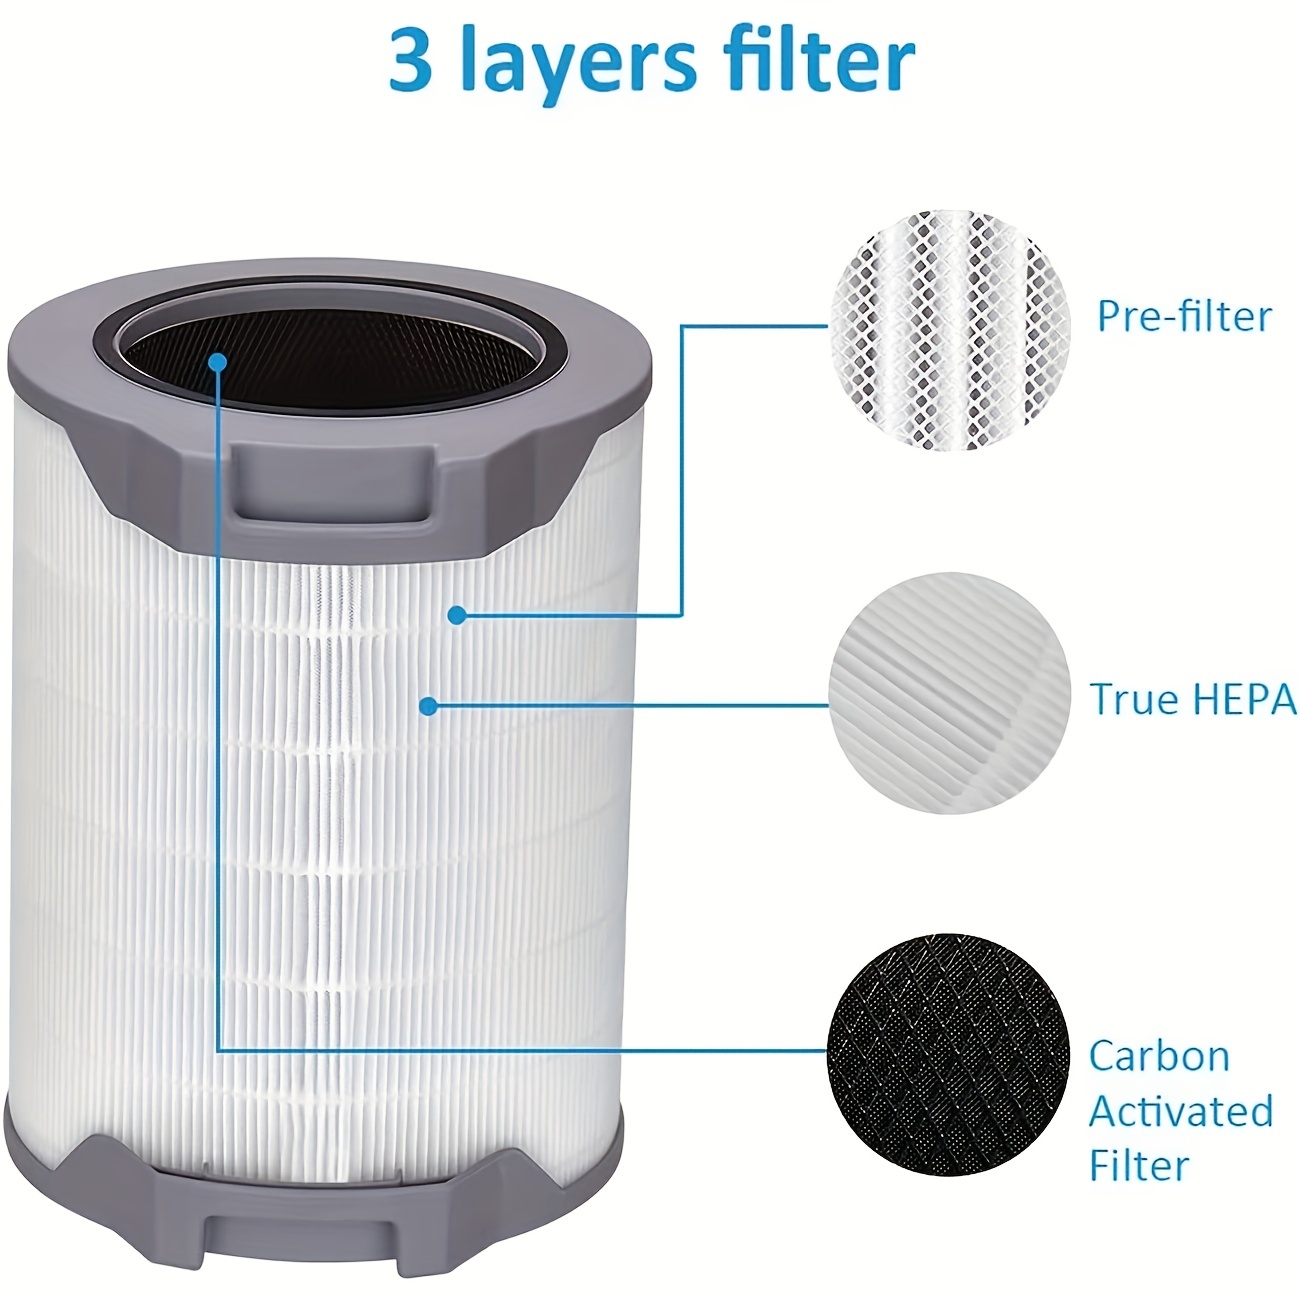  LEVOIT LV-H132 Air Purifier Replacement Filter, 3-in-1 Nylon  Pre-Filter, HEPA Filter, High-Efficiency Activated Carbon Filter, LV-H132-RF,  2 Pack : Home & Kitchen